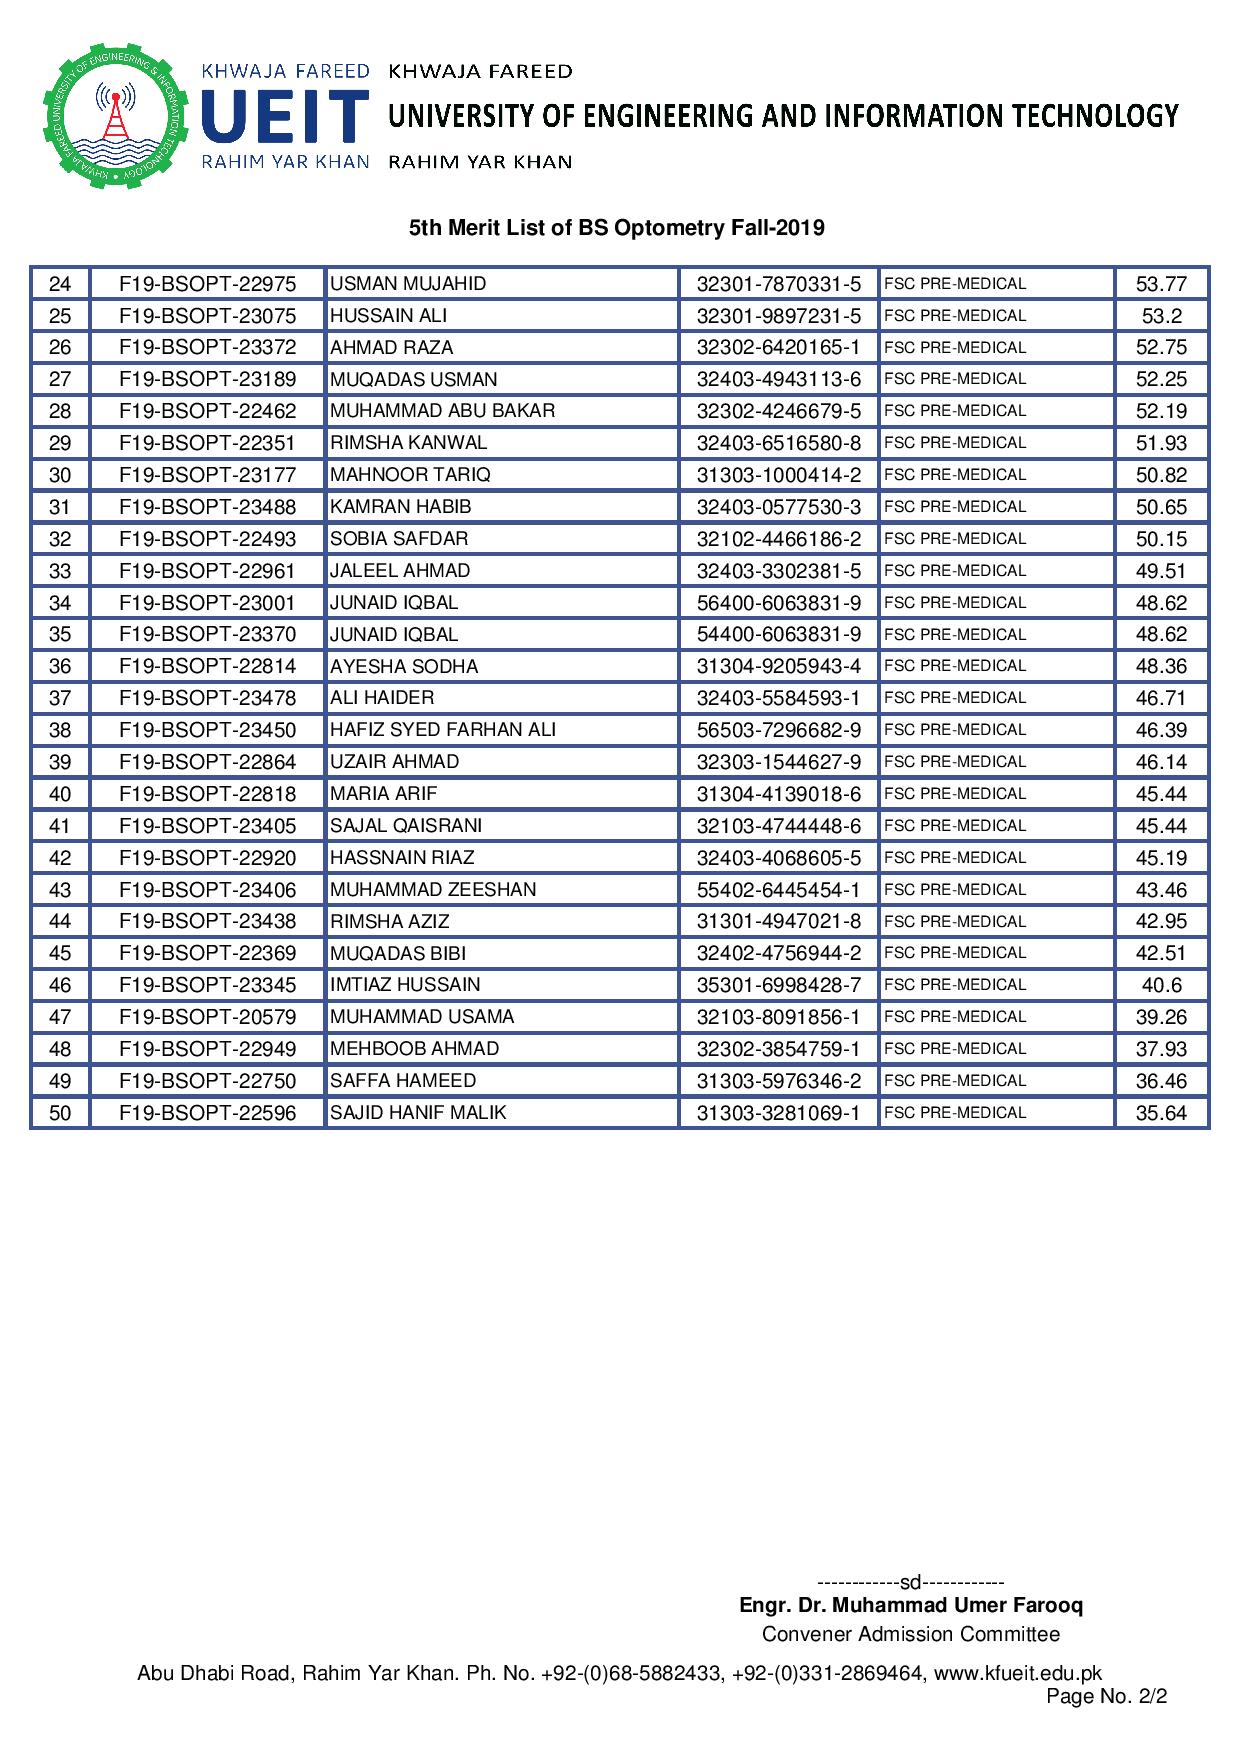 5th Merit List of BS Optometry Fall-2019-page-002